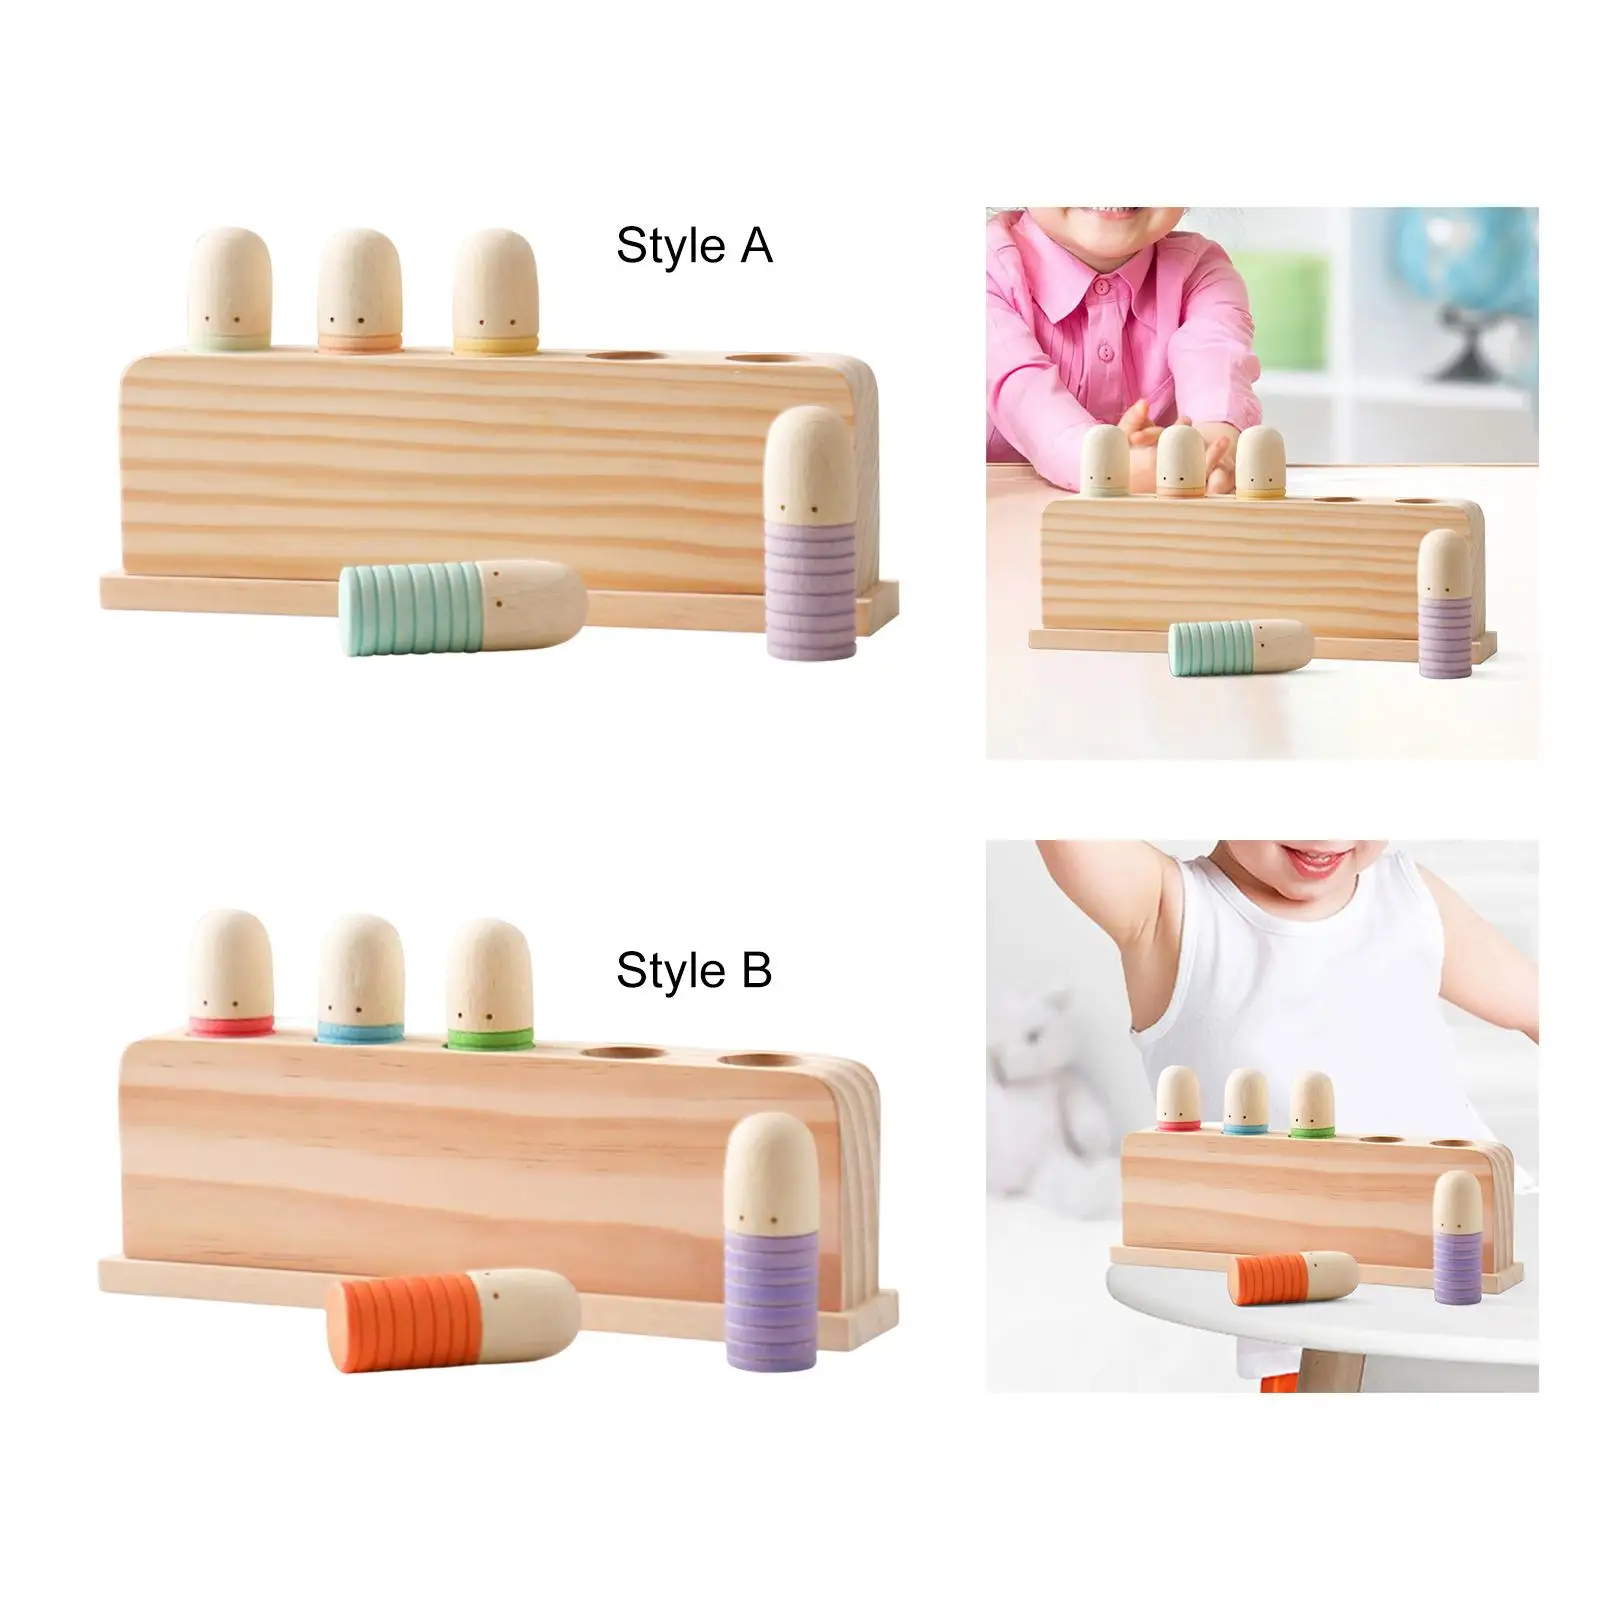 Wooden Rainbow Peg Dolls Shapes Sorting Toys Educational Toys Toddlers Pretend Play People Figures for Girls Boys Birthday Gifts